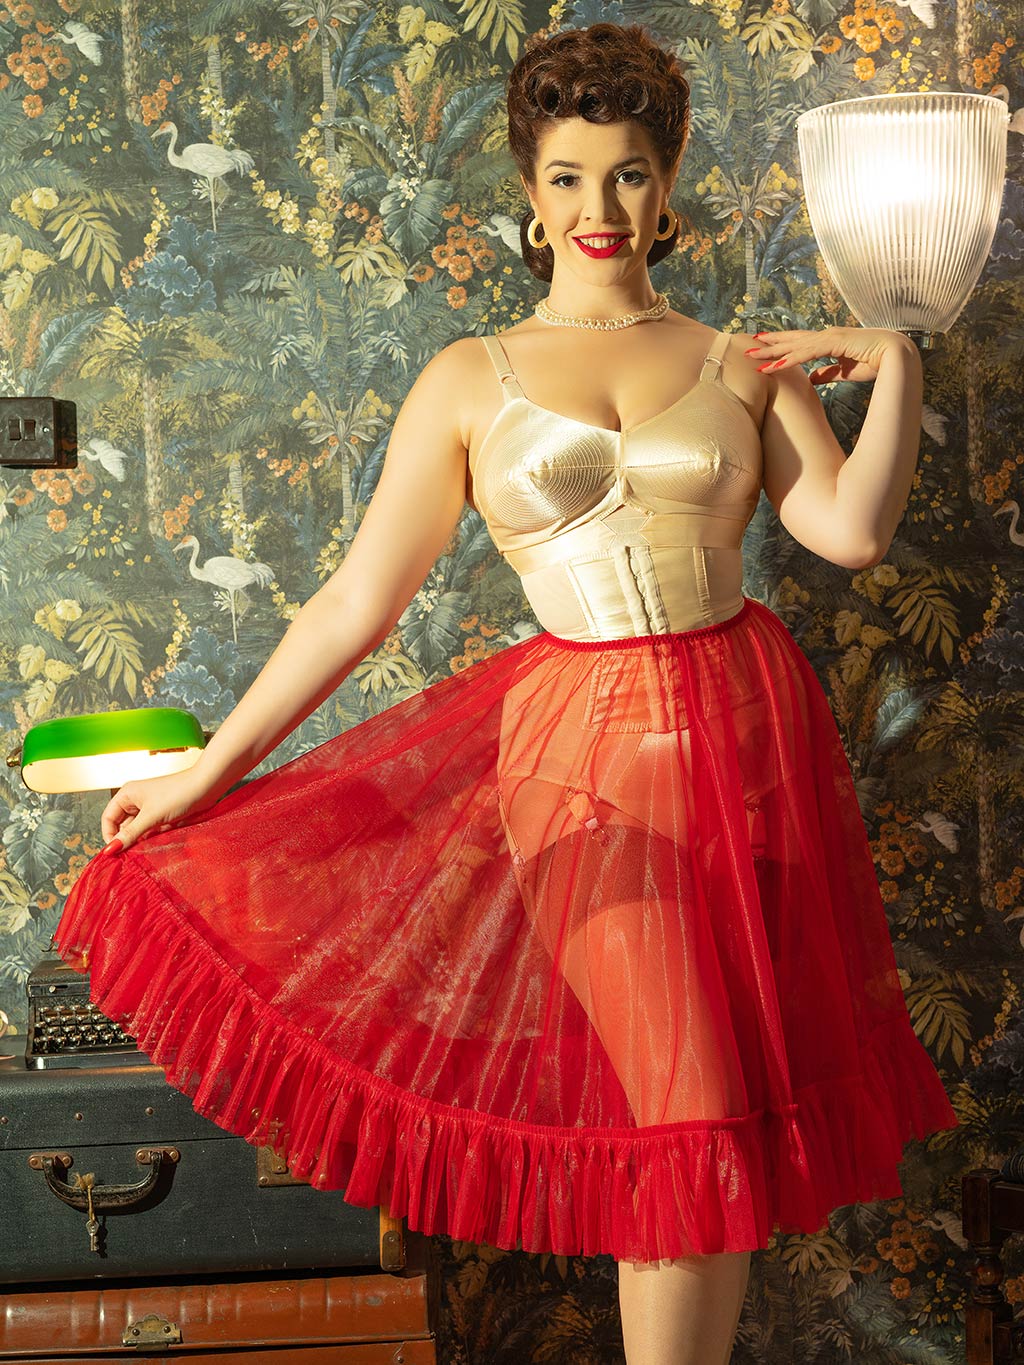 Red Satin Underwired Bra in Vintage Style 1950s Retro Inspired Lingerie  Available in Plus Size -  Canada